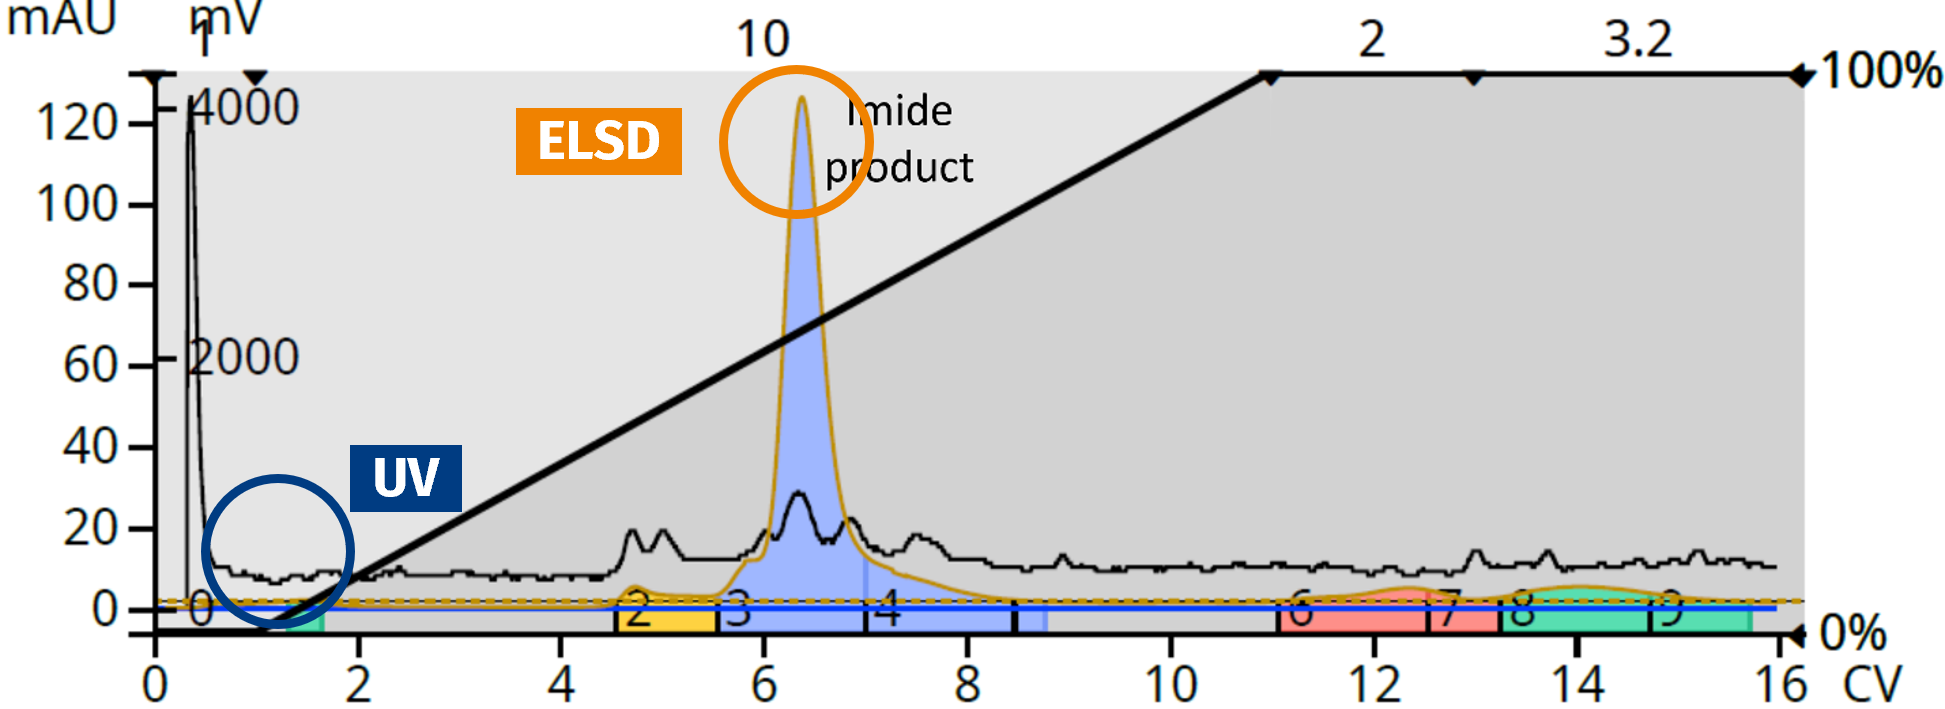 Imide reaction mixture flash purification with a heptane/ethyl acetate gradient. ELSD improved product detection compared to UV detection only.